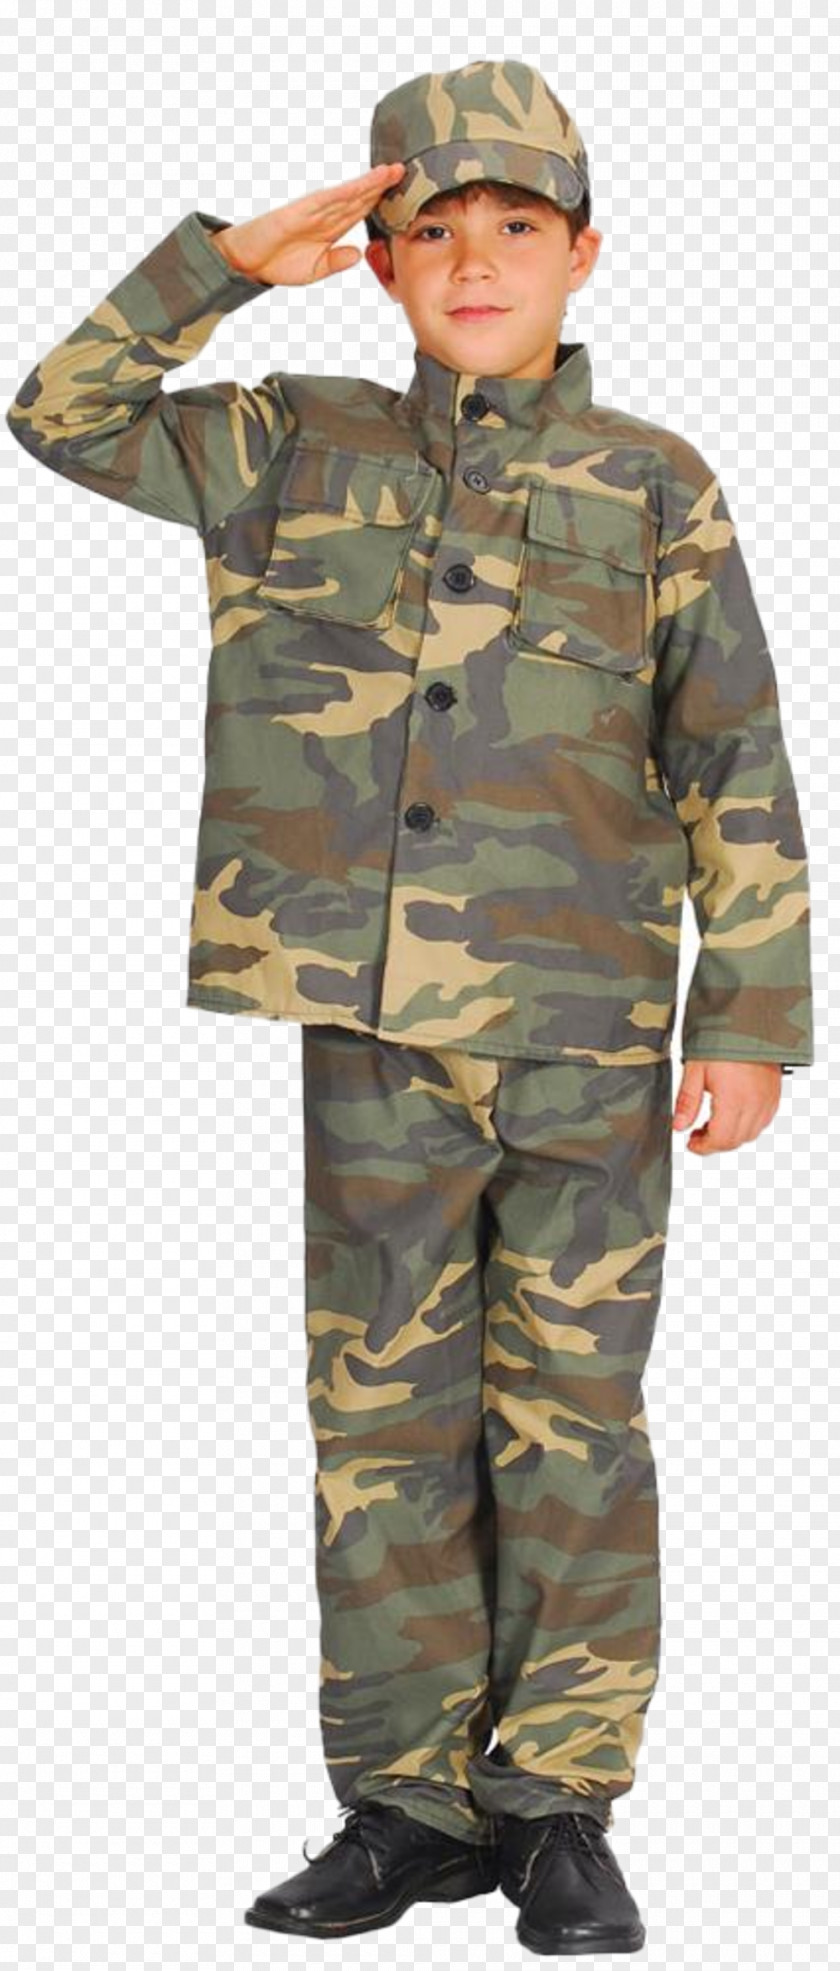 Rambo Commando Costume Party Military Boy PNG